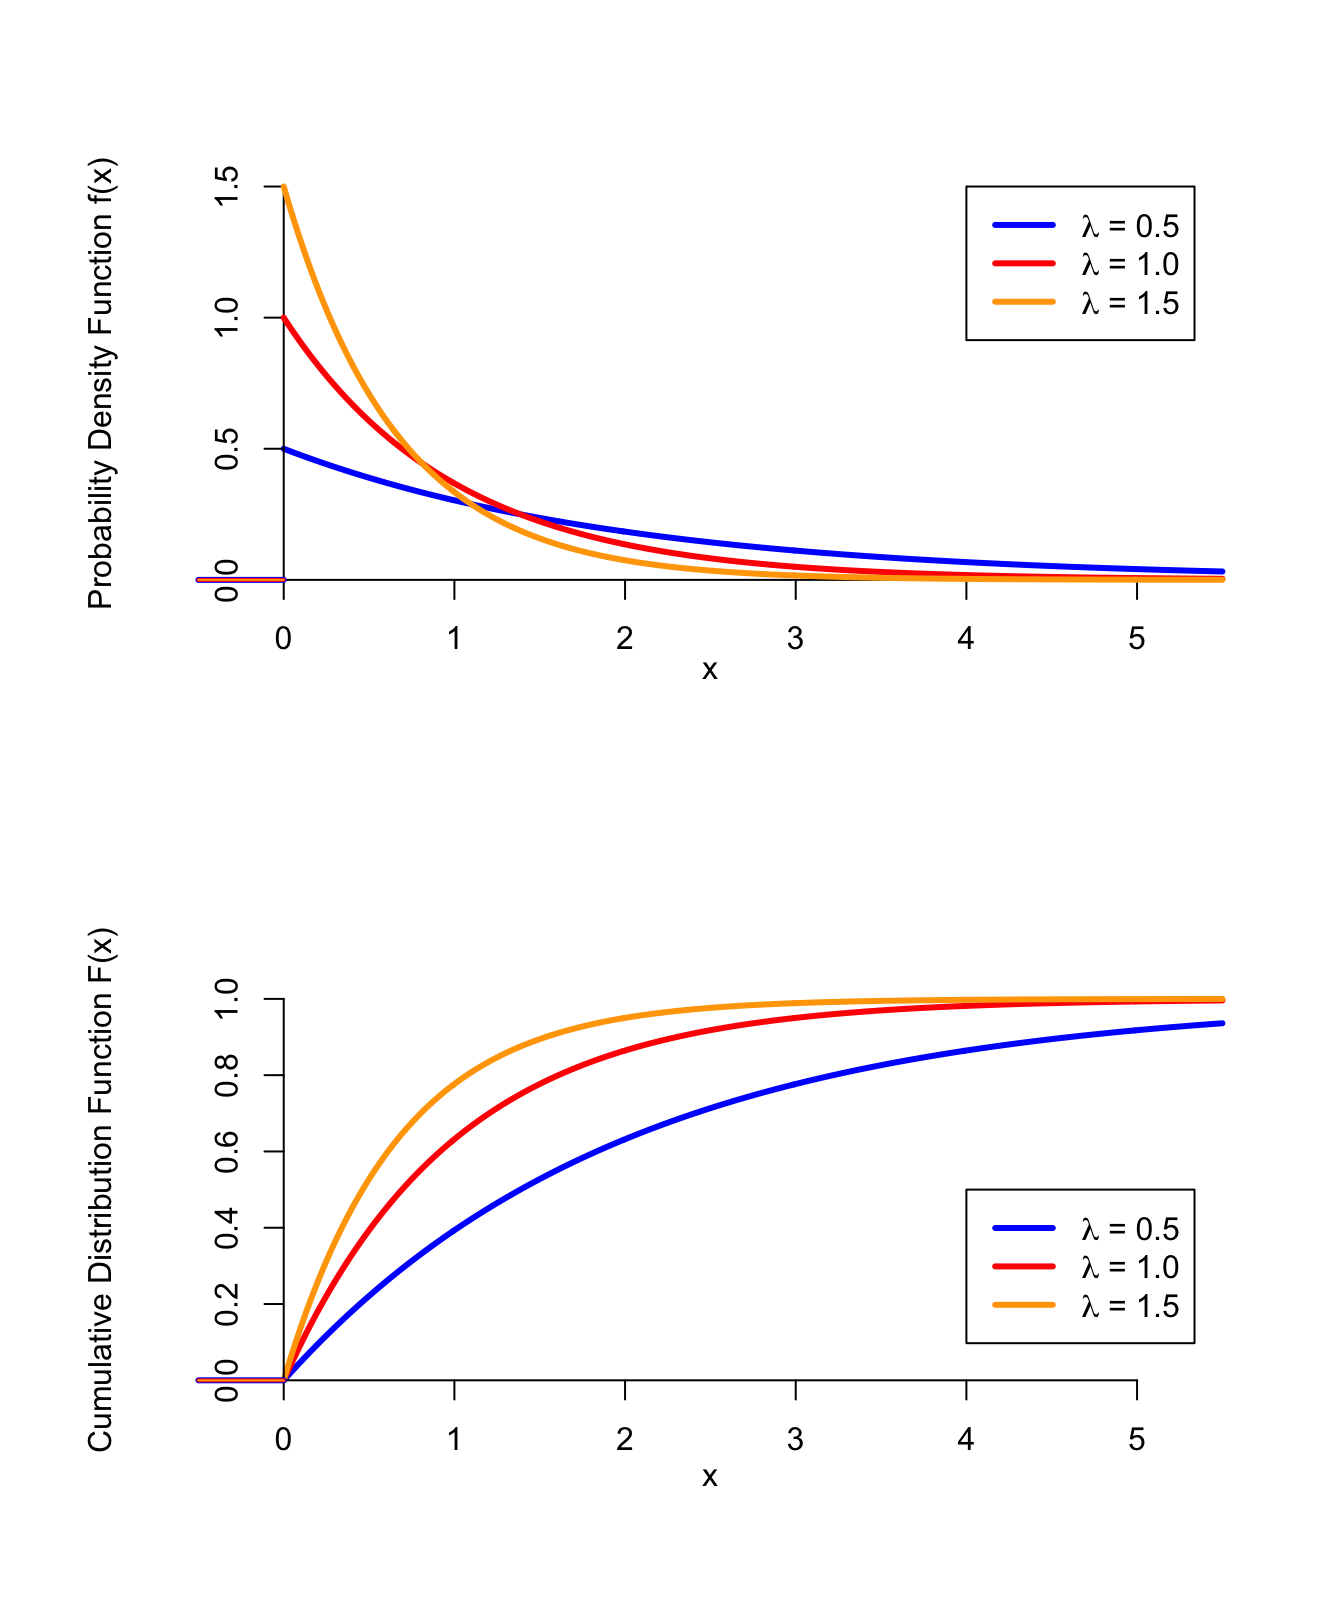 PDF and CDF of the Exponential Distribution